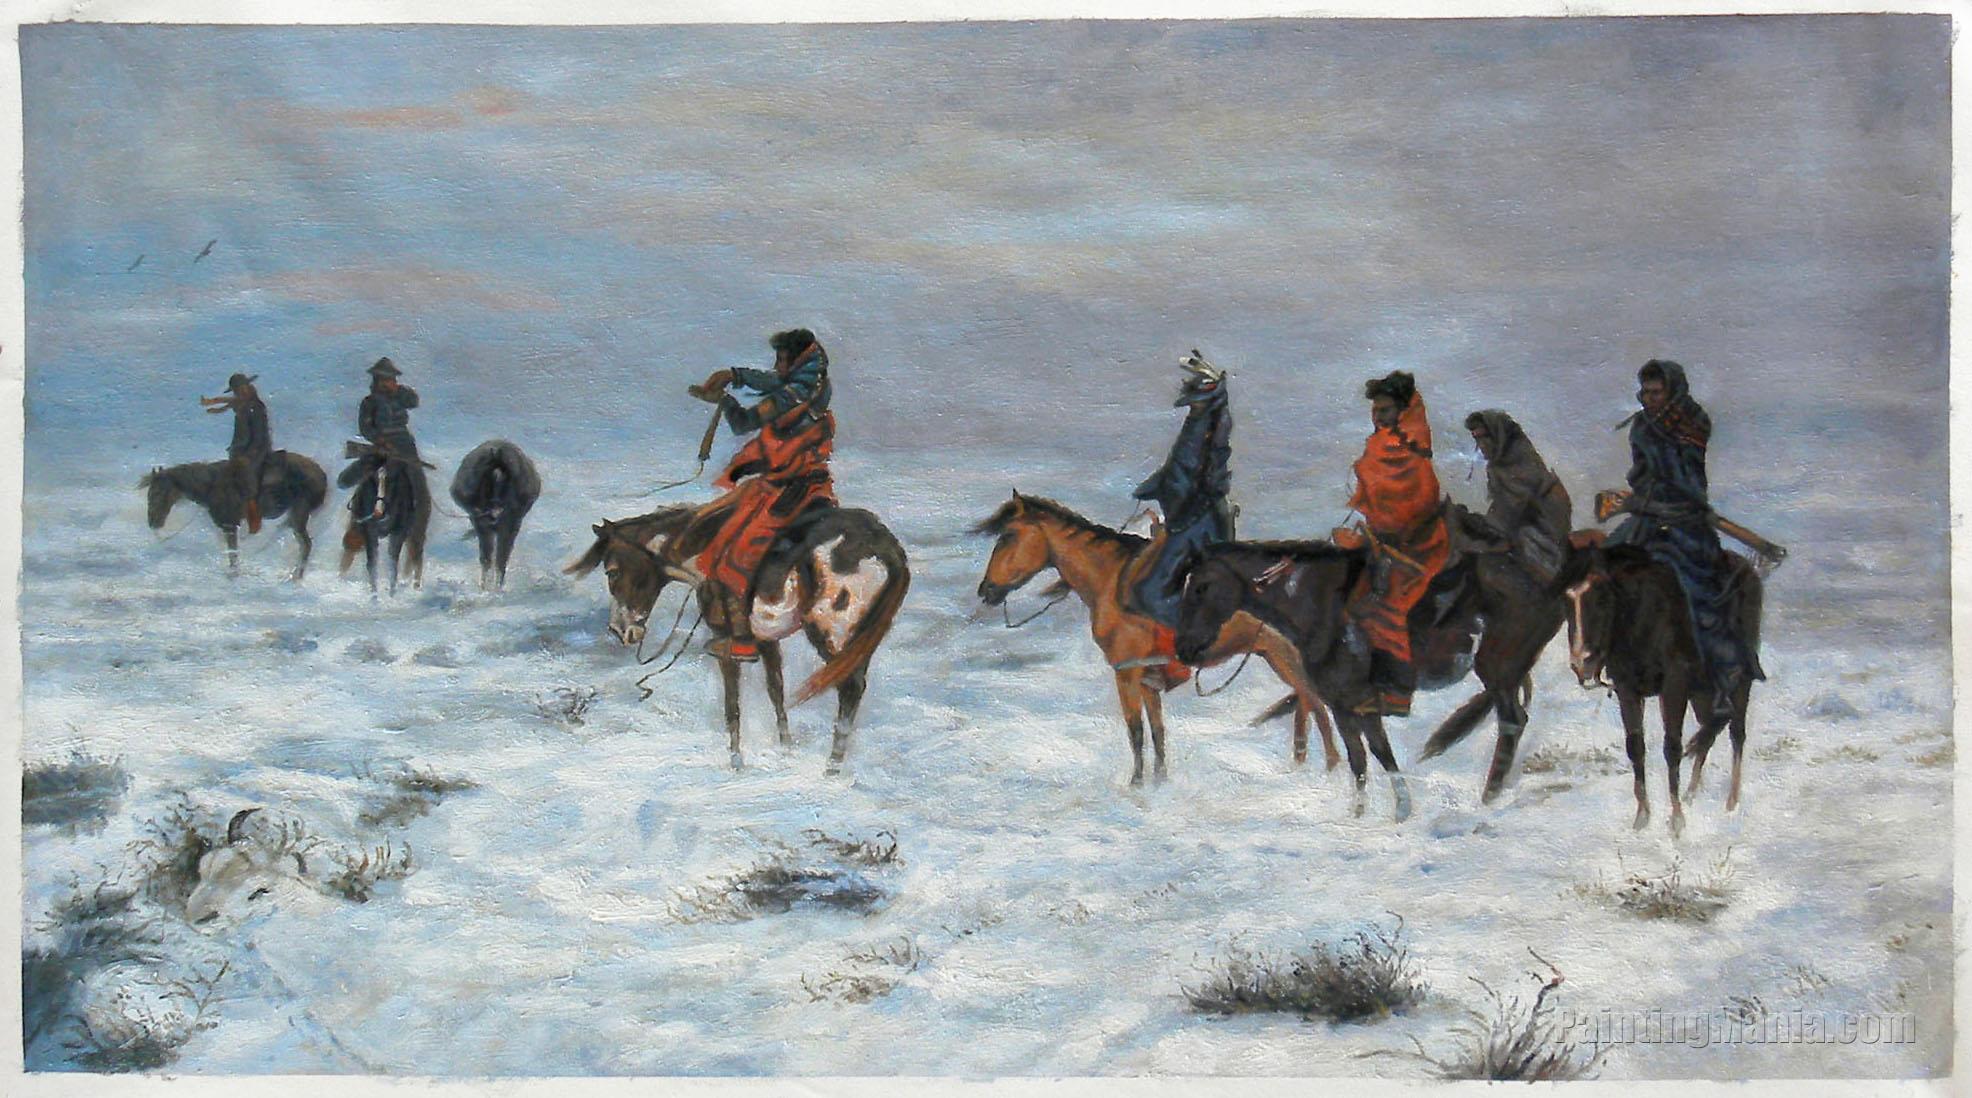 Details about   Charles M Russell "Lost in a Snowstorm-We Are Friends" 11 x 14 Matted Print 